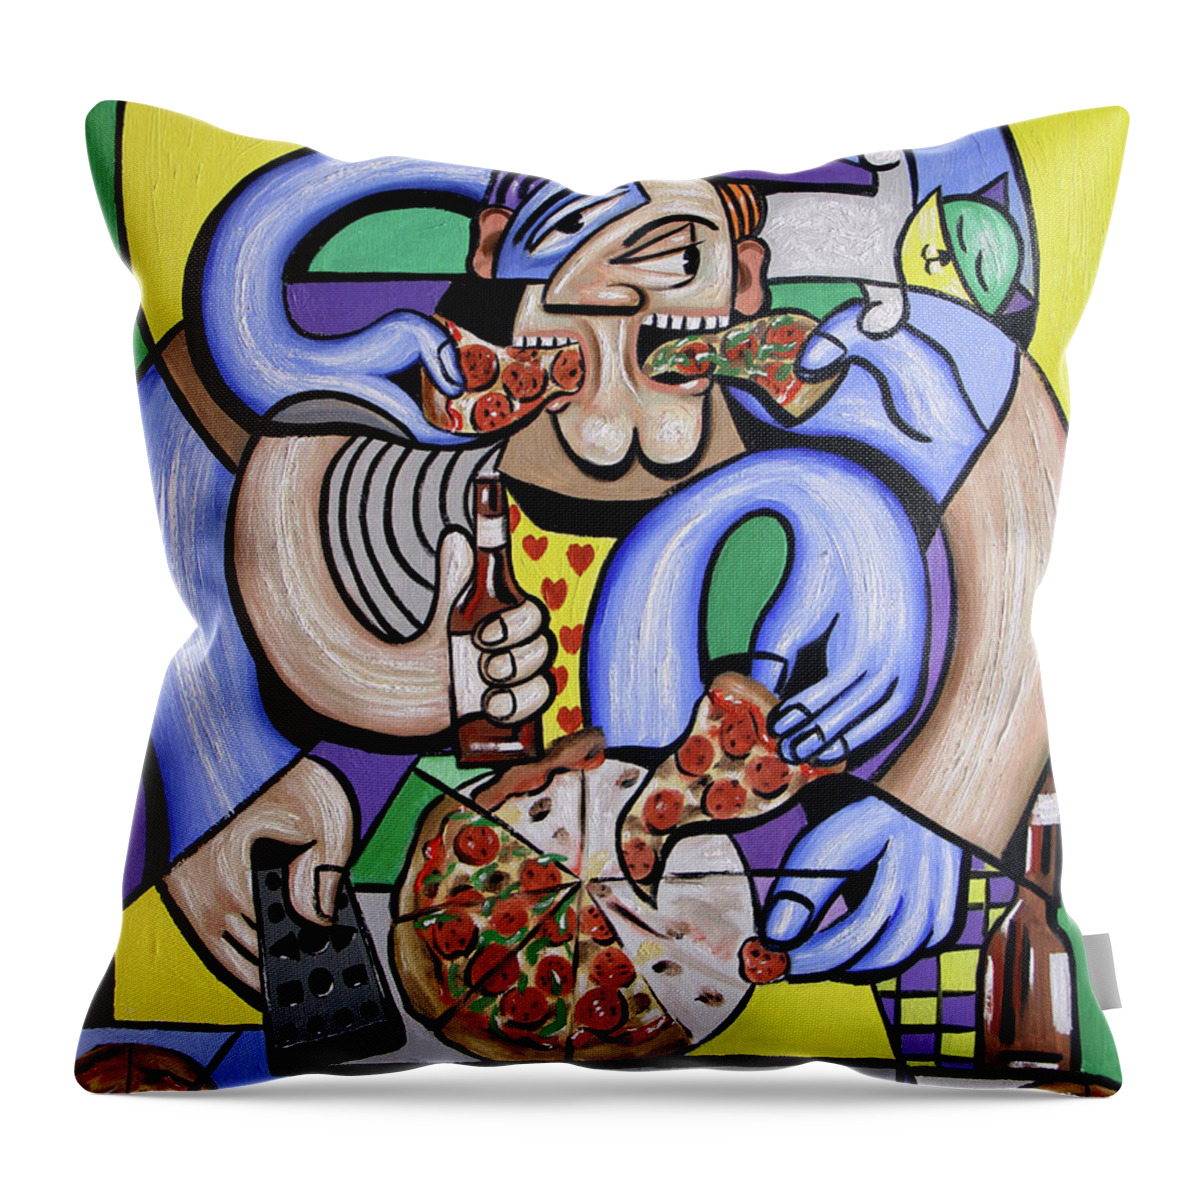 The Pizzaholic Throw Pillow featuring the painting The Pizzaholic by Anthony Falbo